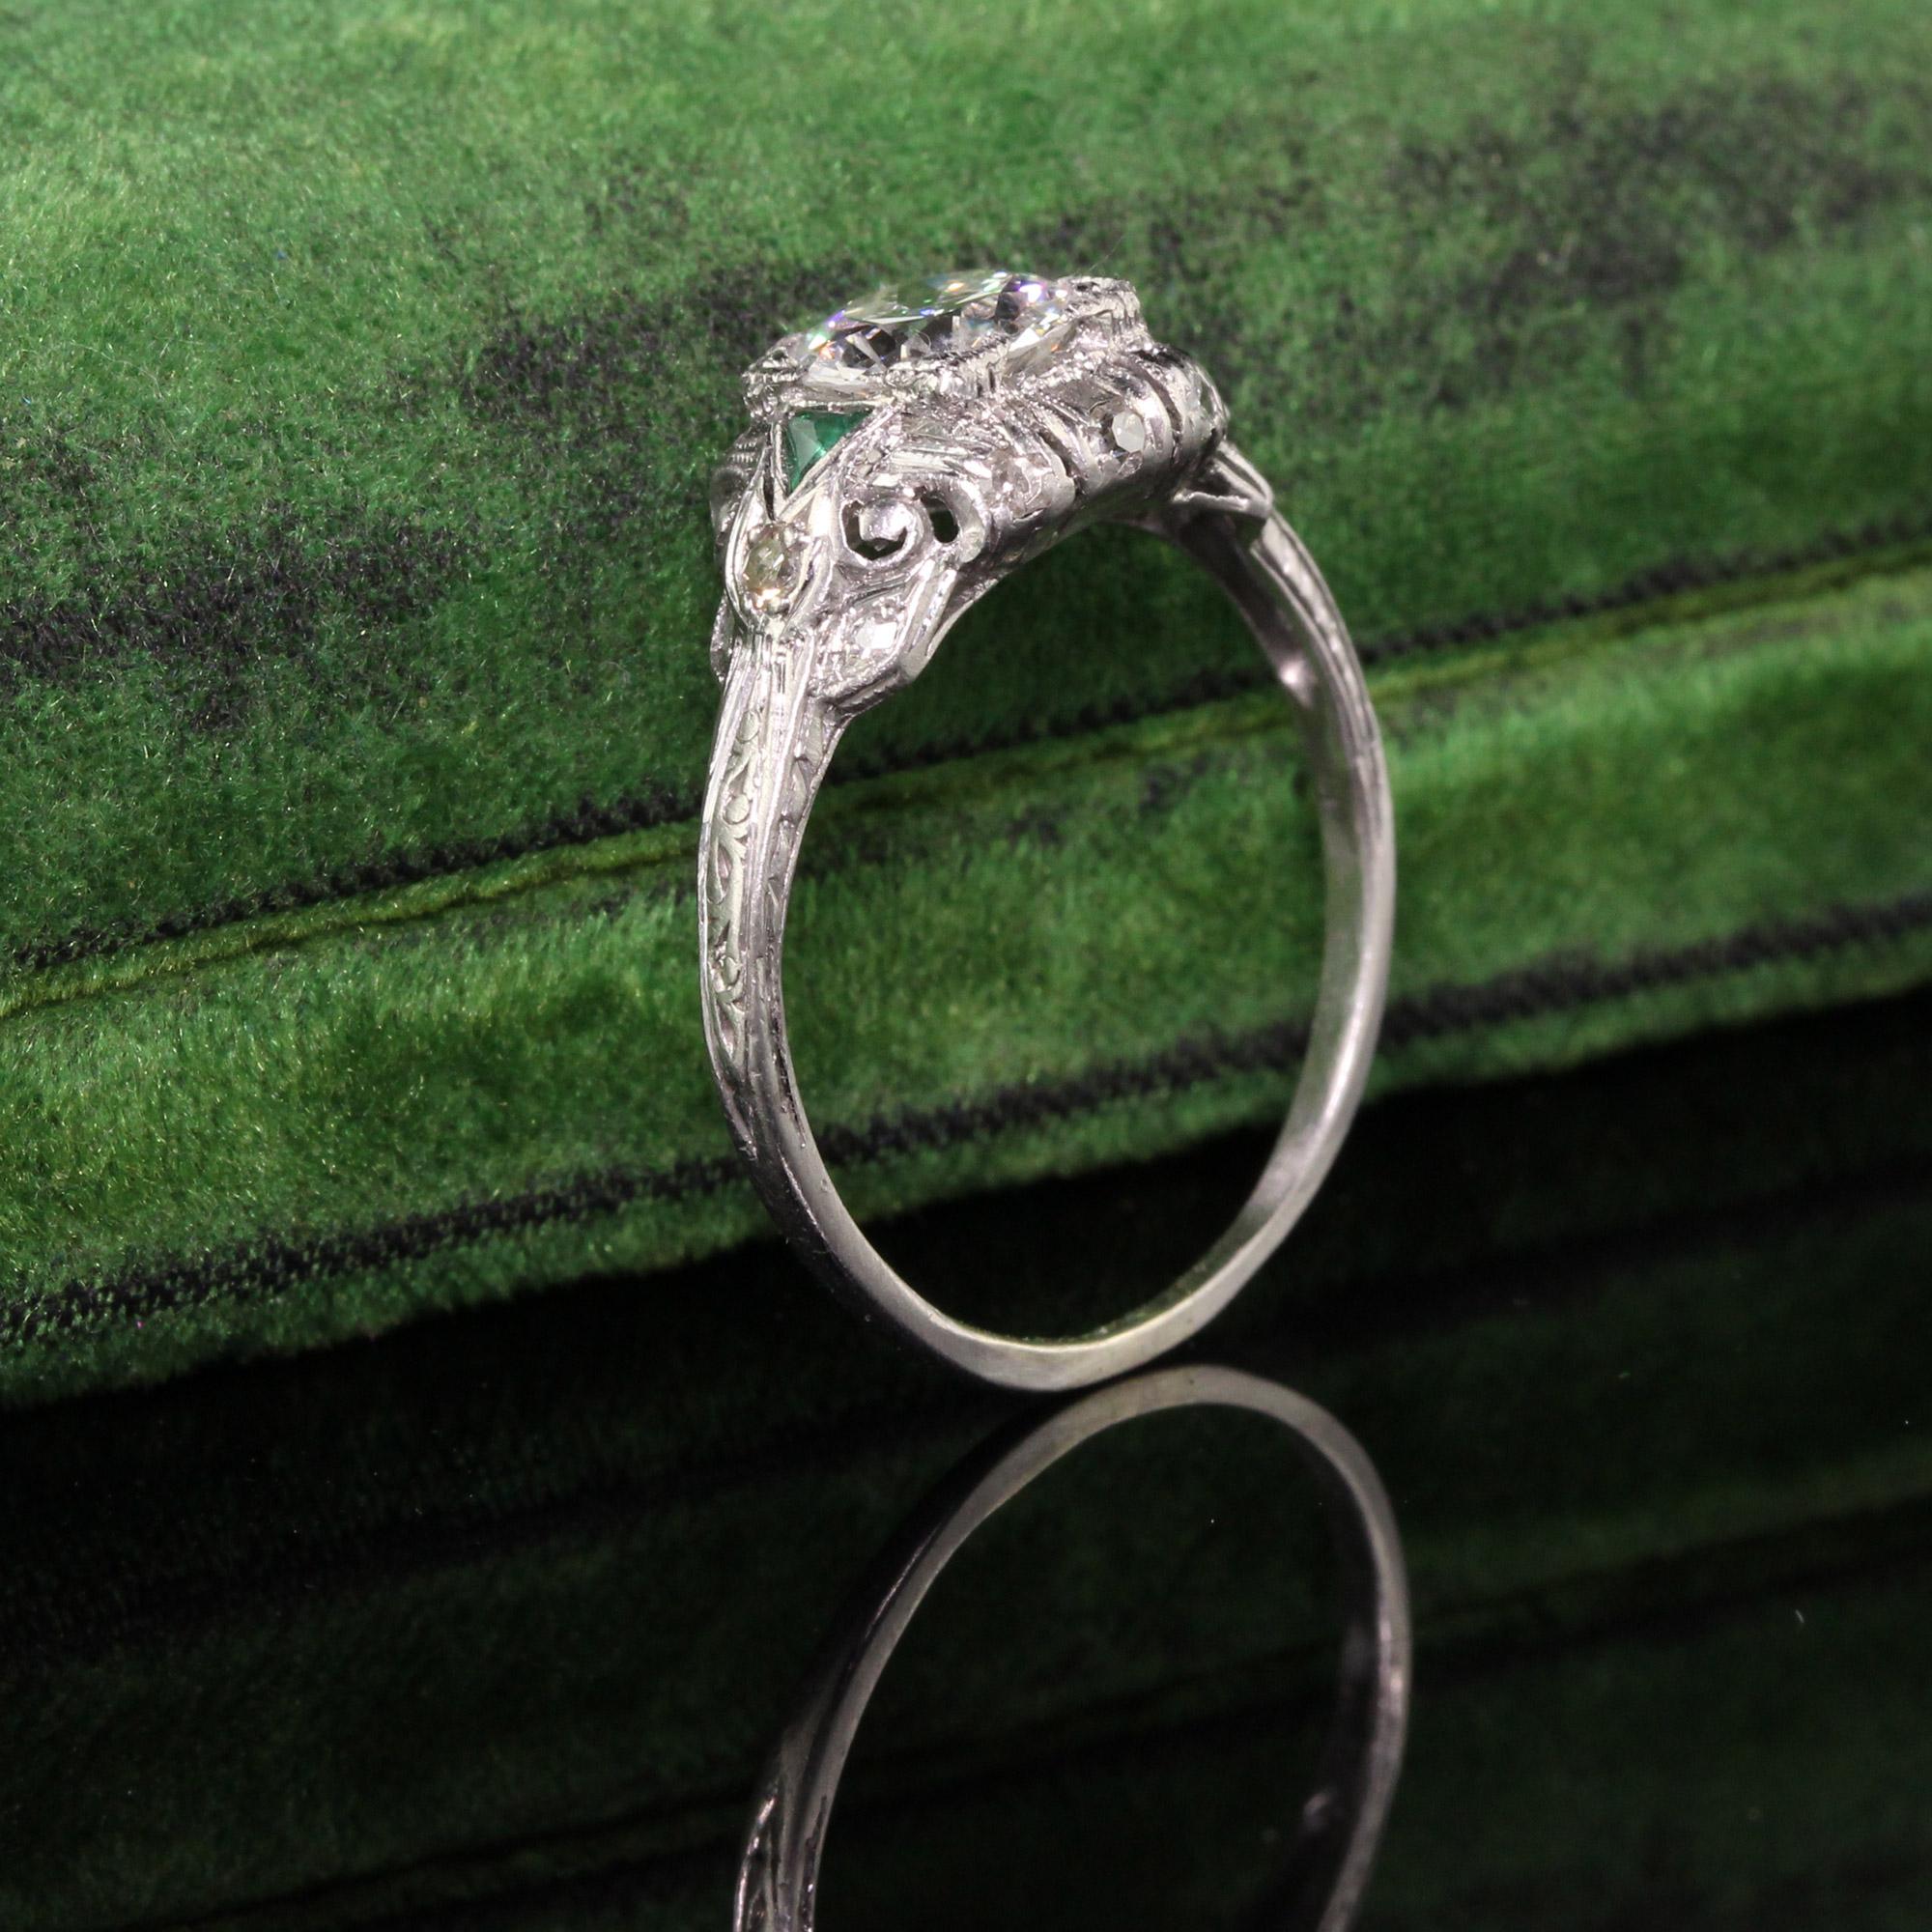 Beautiful Antique Art Deco Platinum Old European Diamond Engagement Ring. This gorgeous art deco engagement ring has a very bright and white old european cut diamond in the center of a stunning platinum mounting with emerald accents.

Item